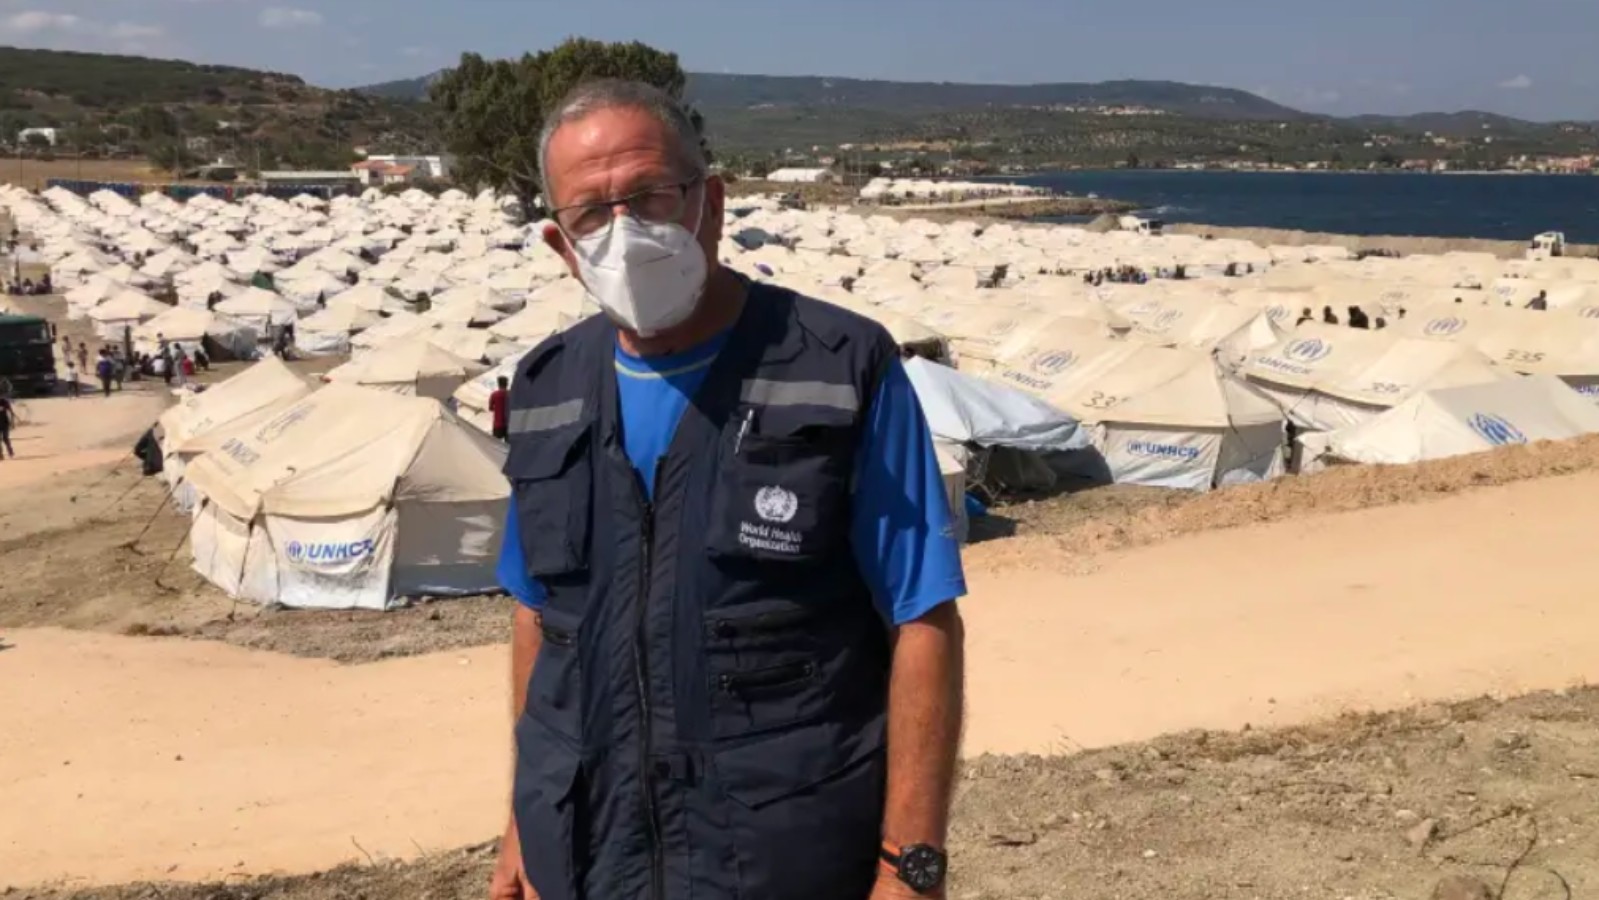 Dr. Elhanan Bar-On, director of the Israel Center for Disaster Medicine and Humanitarian Response, at the Lesbos camp. Photo courtesy of Sheba Medical Center